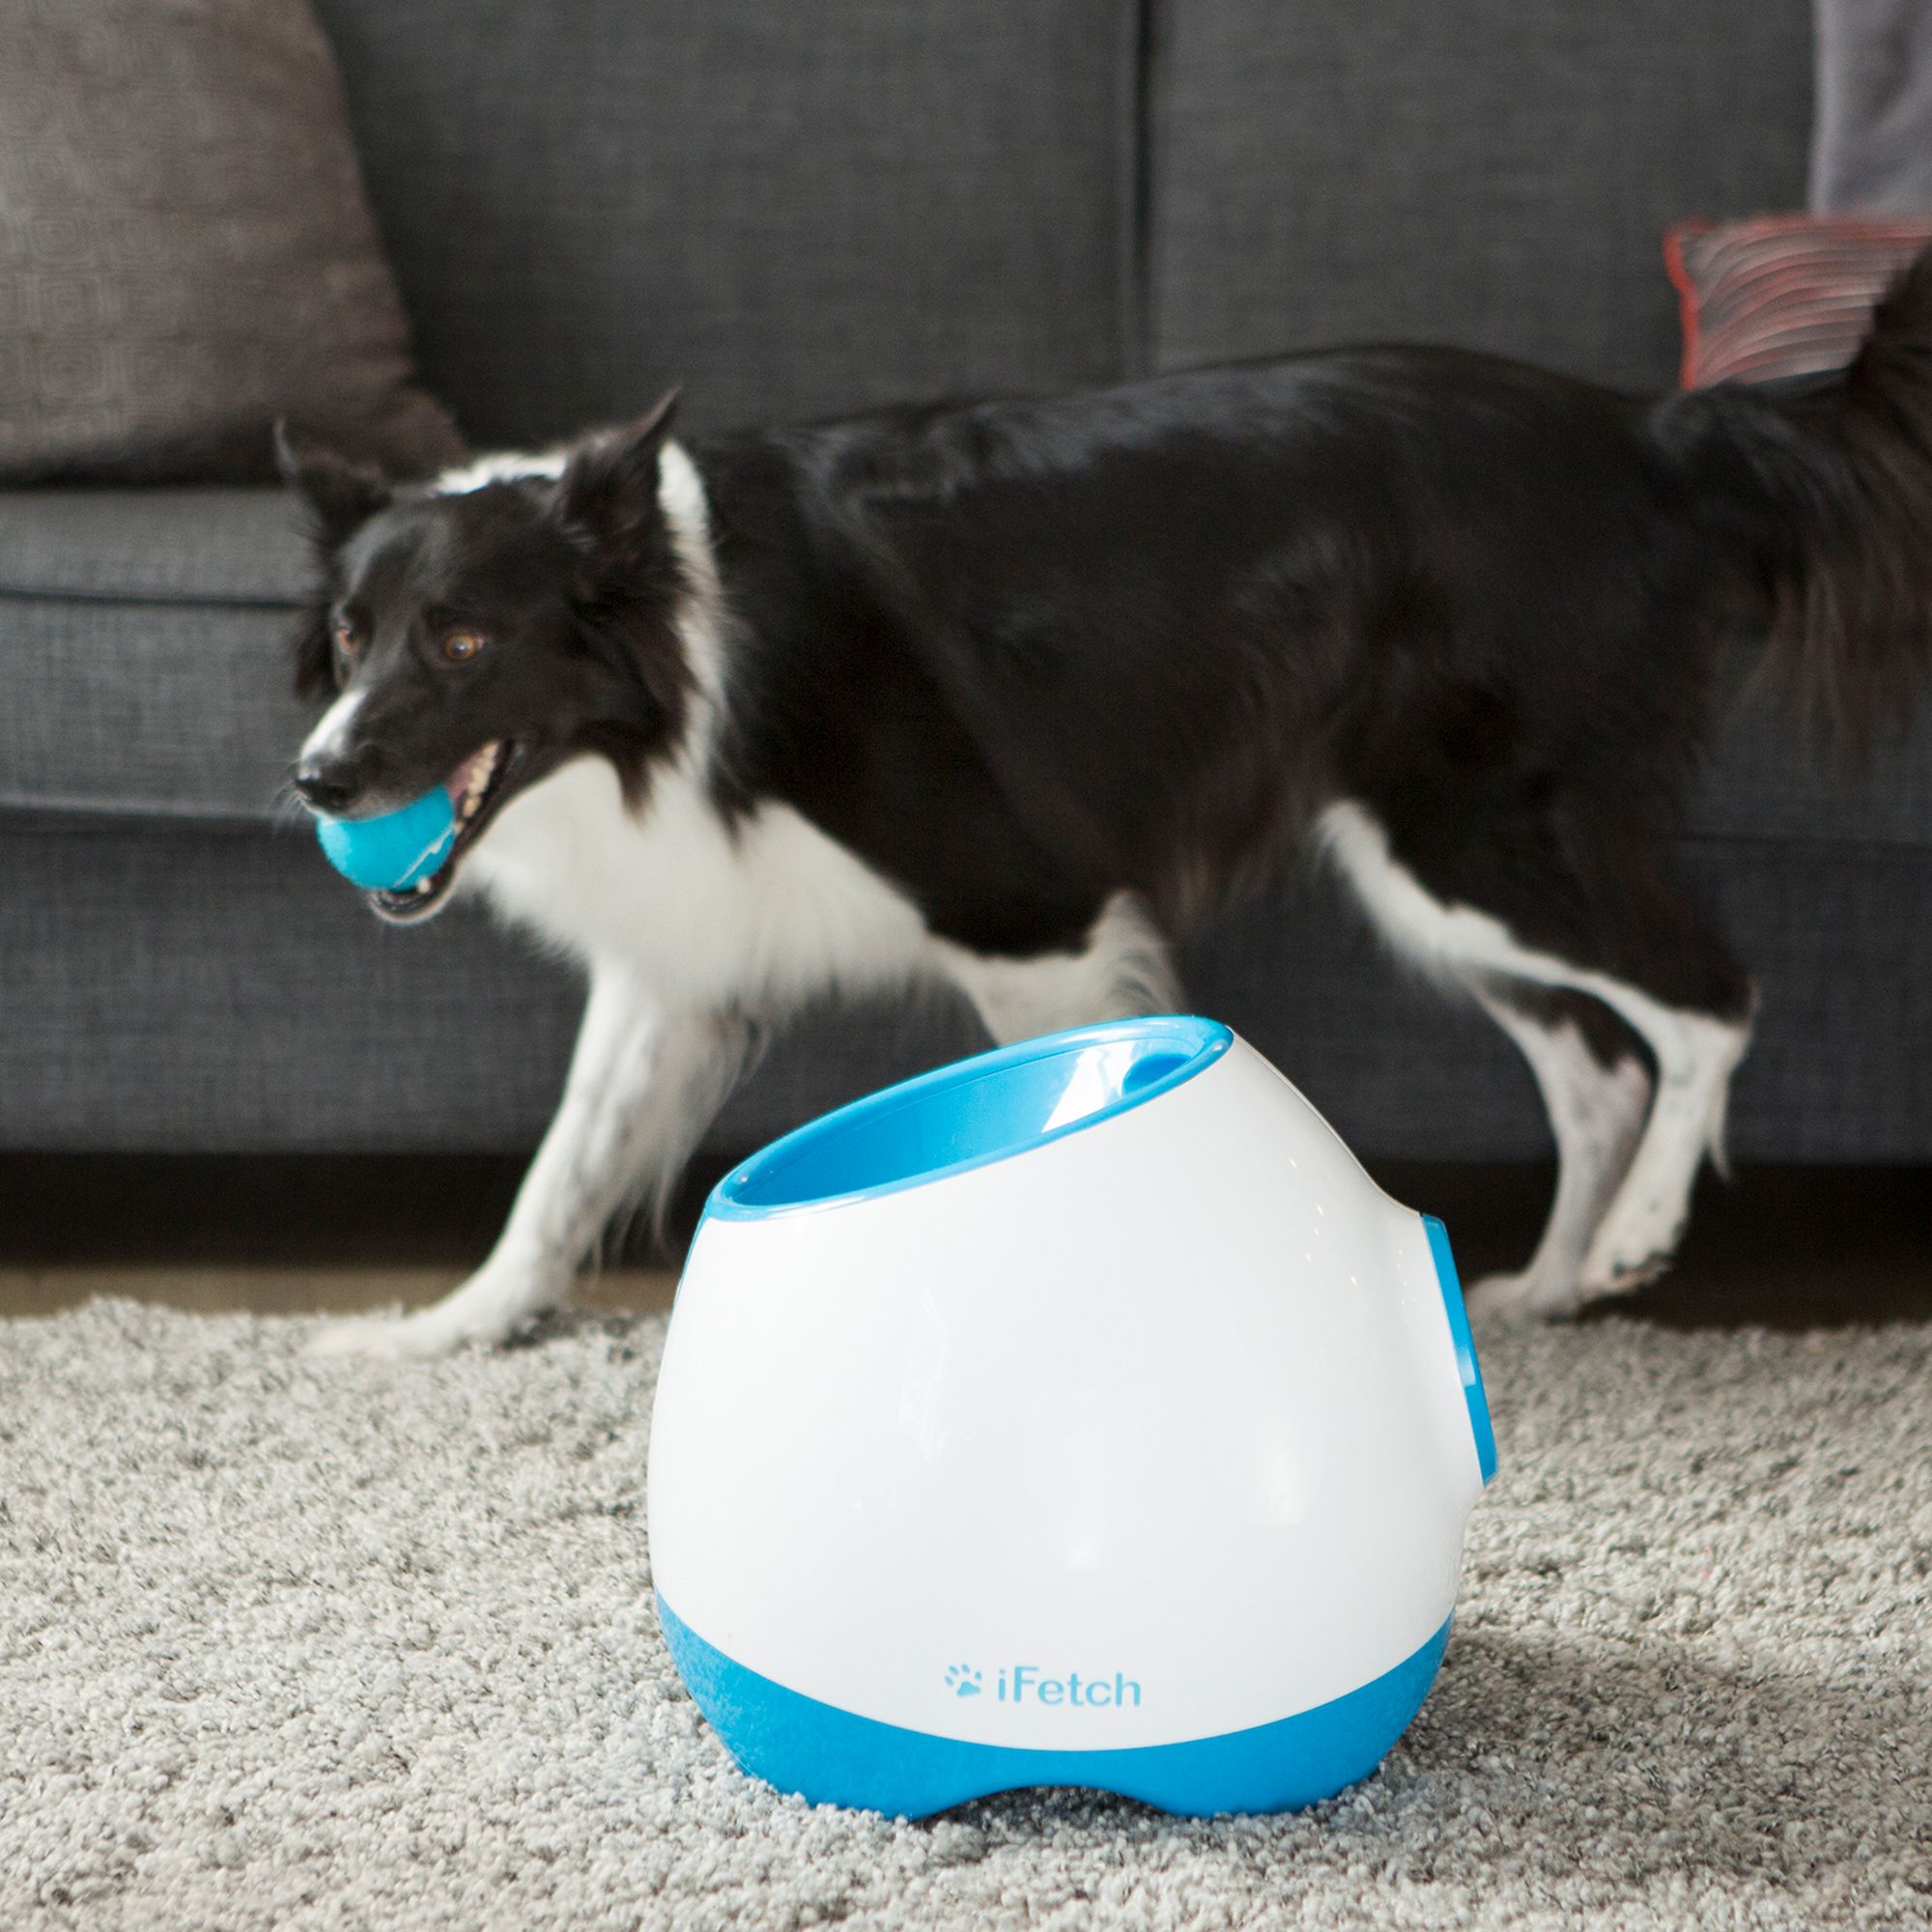 ifetch too interactive ball launcher for dogs